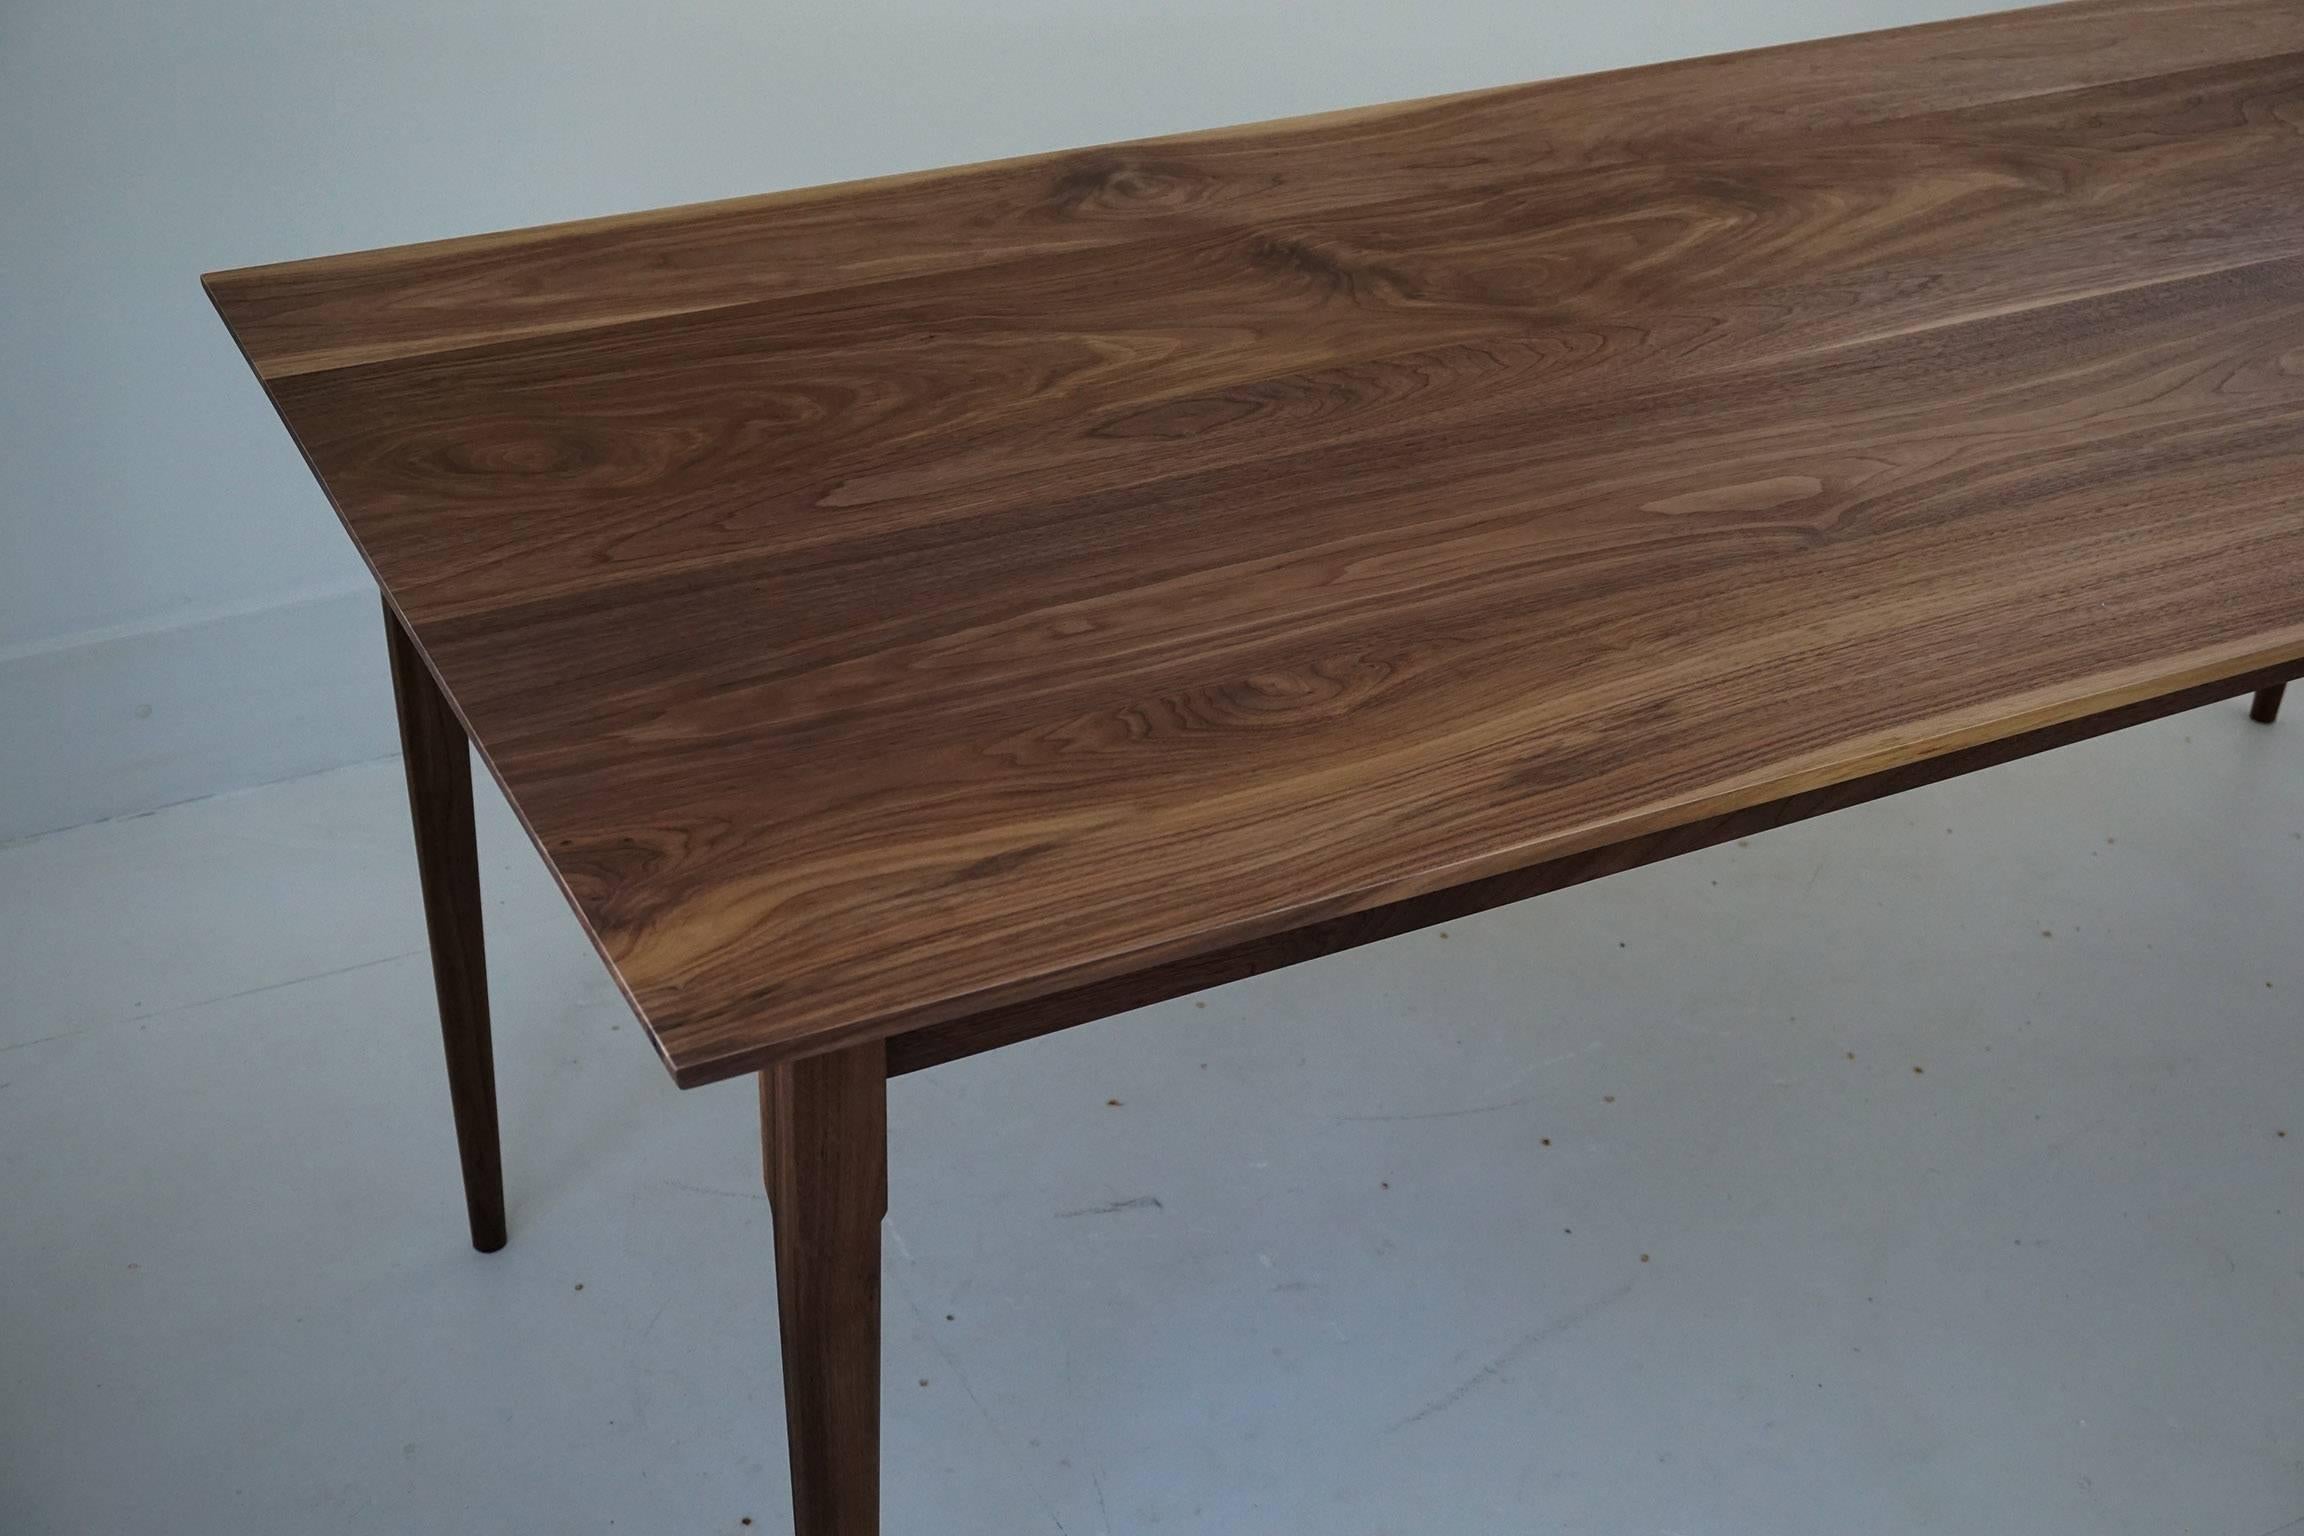 Reunion Dining Table in Walnut / Modern Shaker Scandinavian Inspired In New Condition For Sale In Kingston, NY